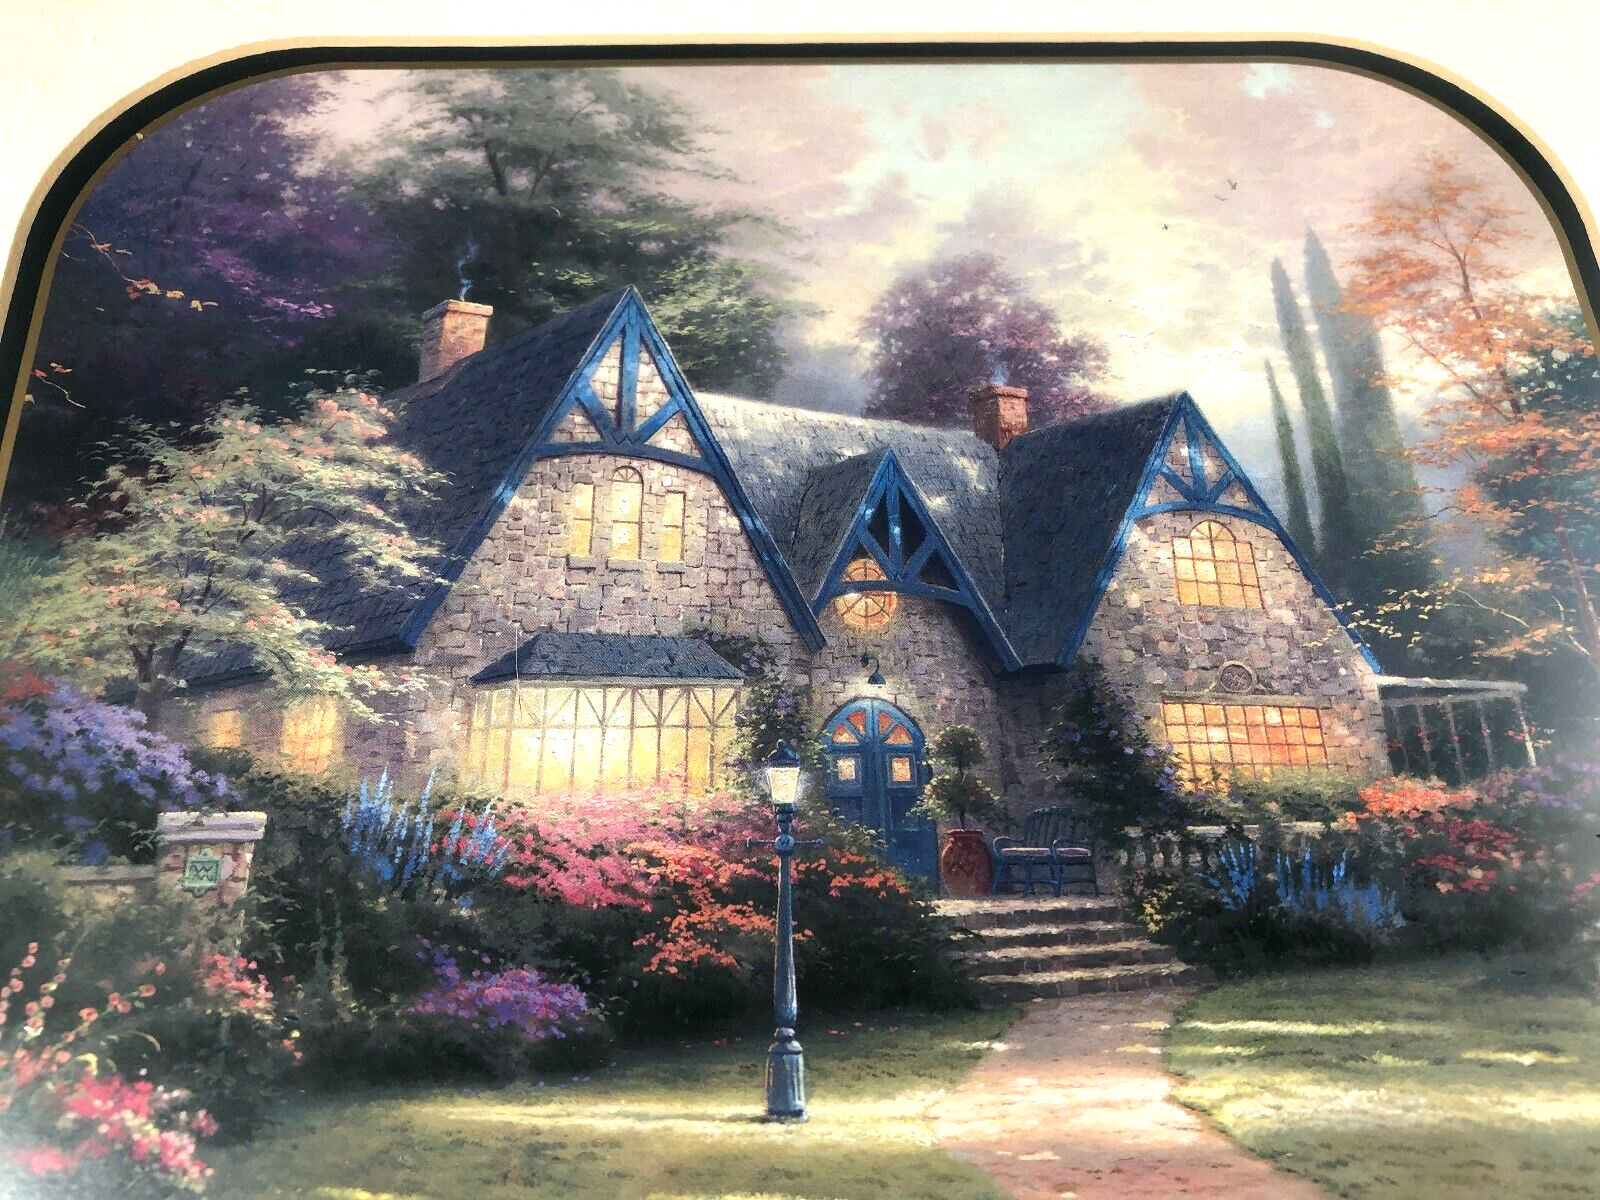 LOT OF 2 THOMAS KINKADE COLLECTOR PRINTS WINSOR MANOR-EVENING & MERRITTS COTTAGE